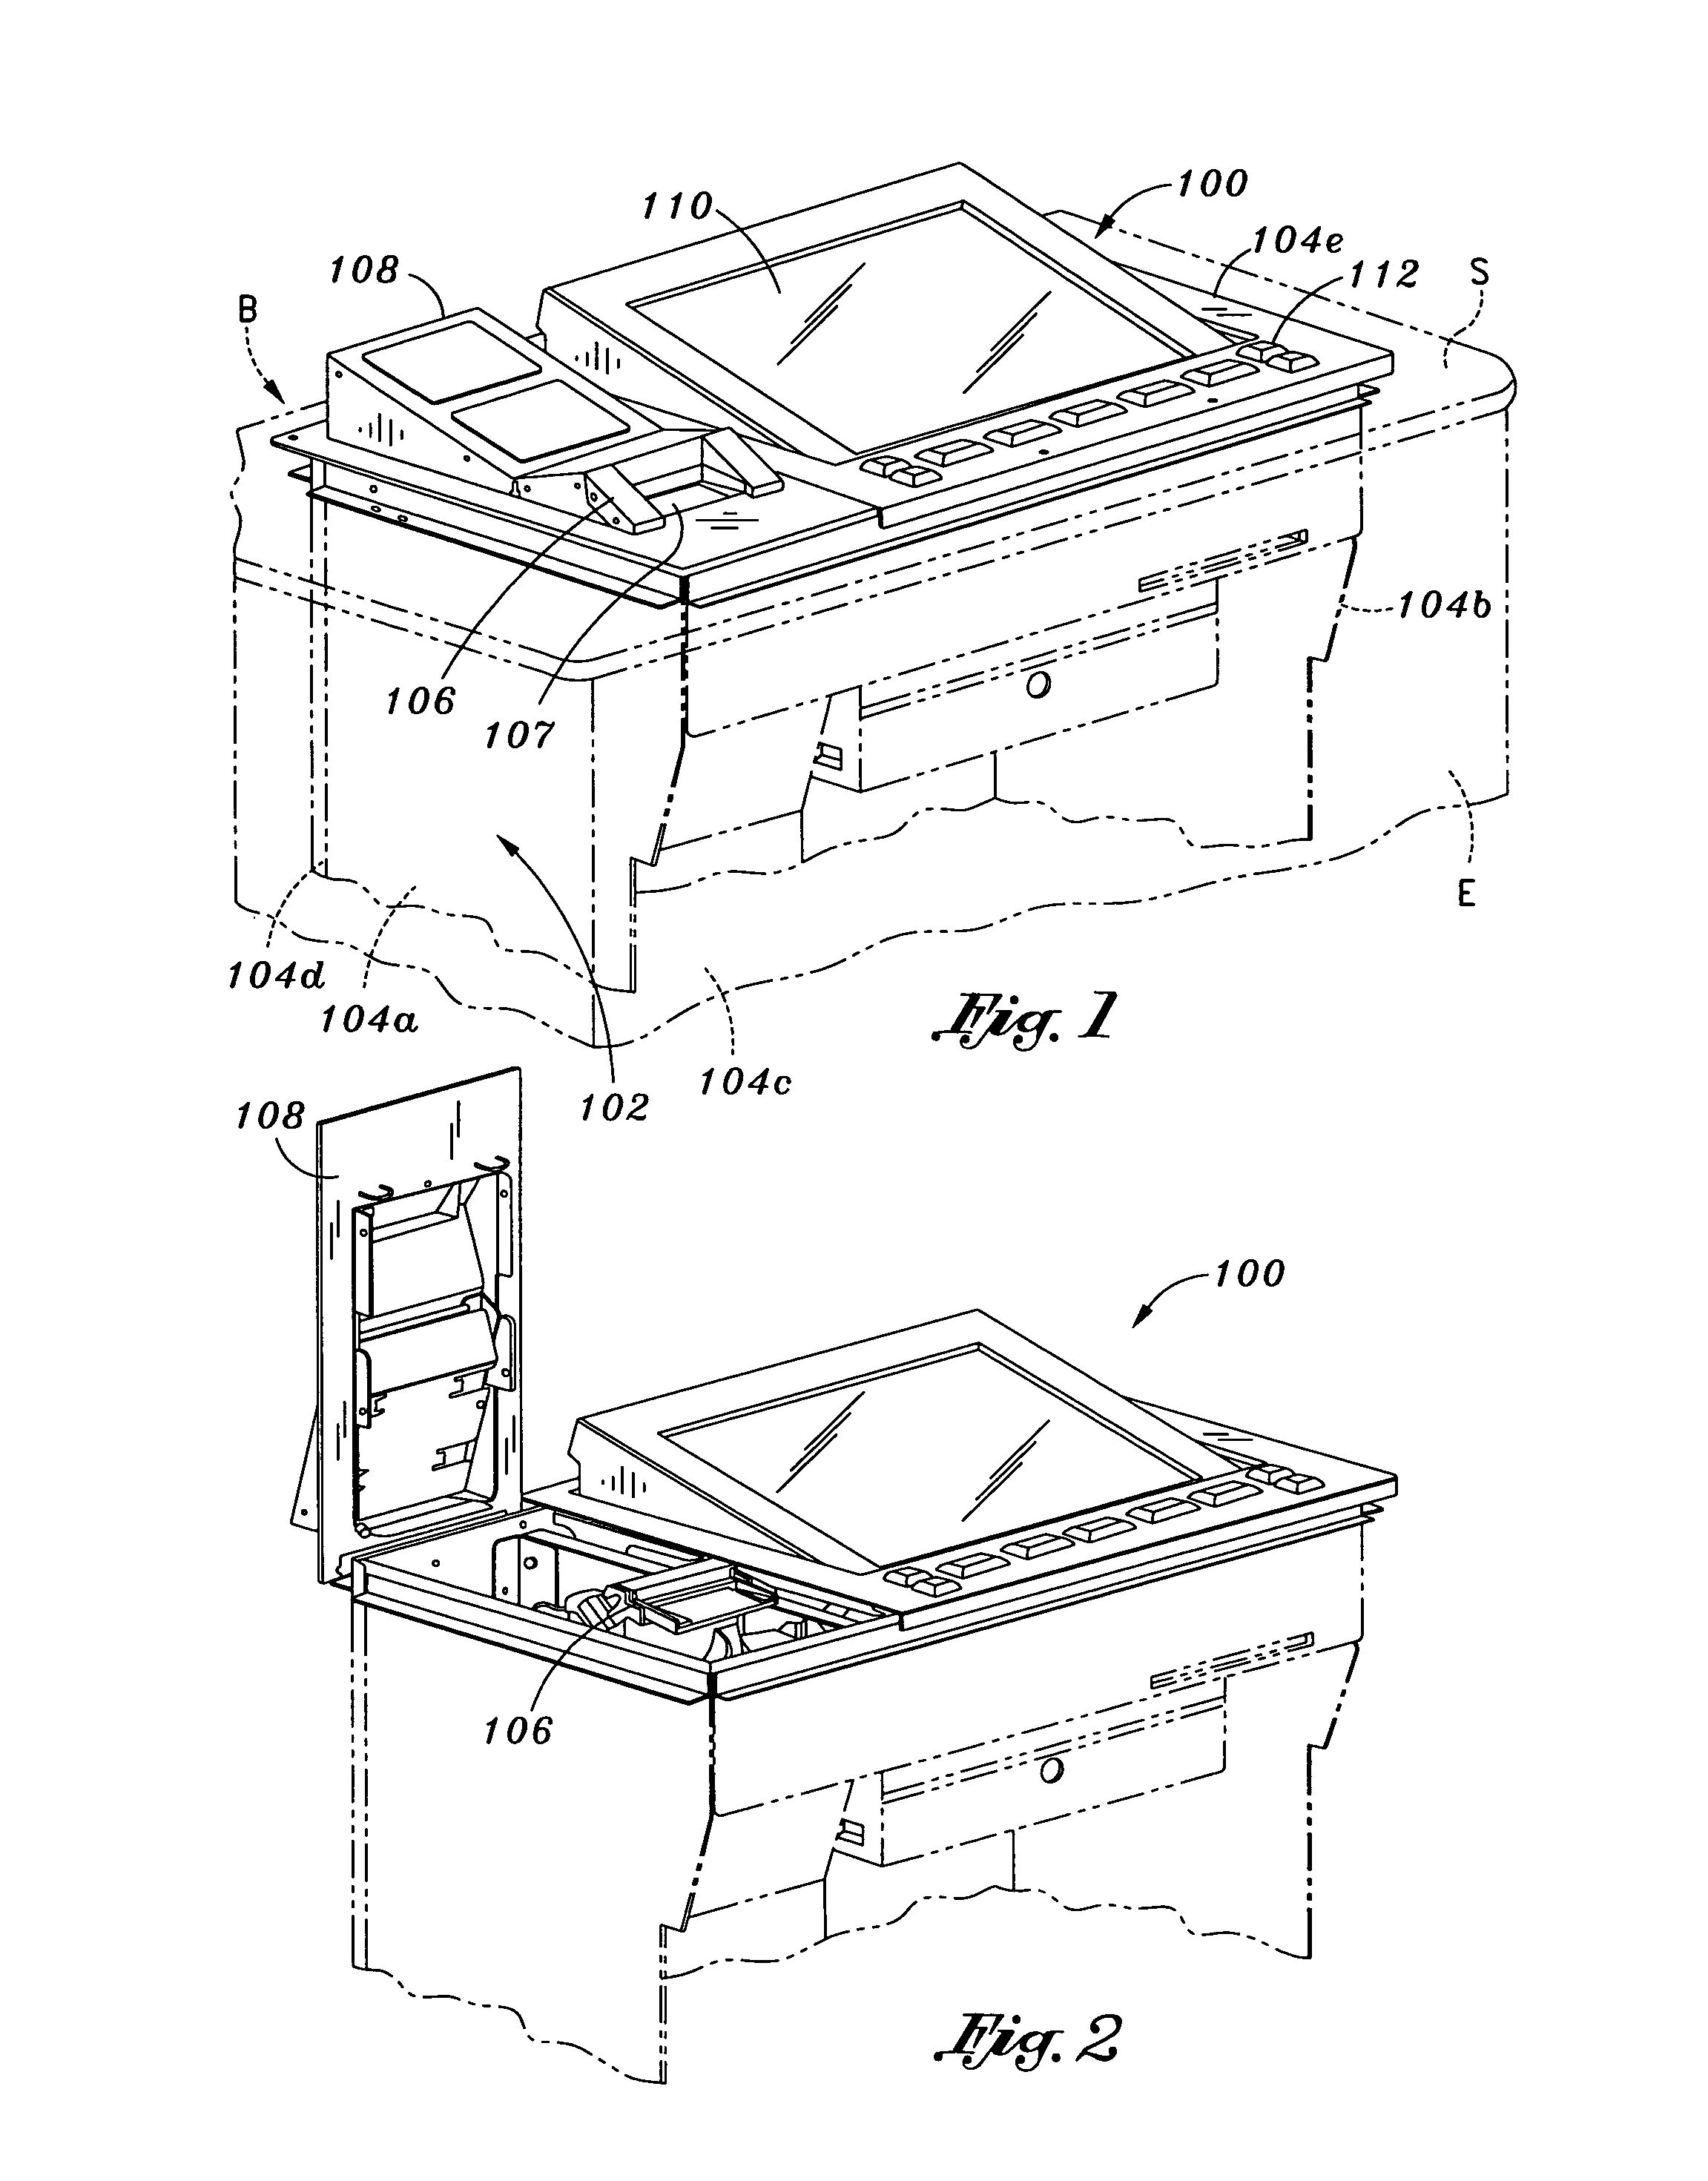 Gaming device with a vertically translating currency acceptor